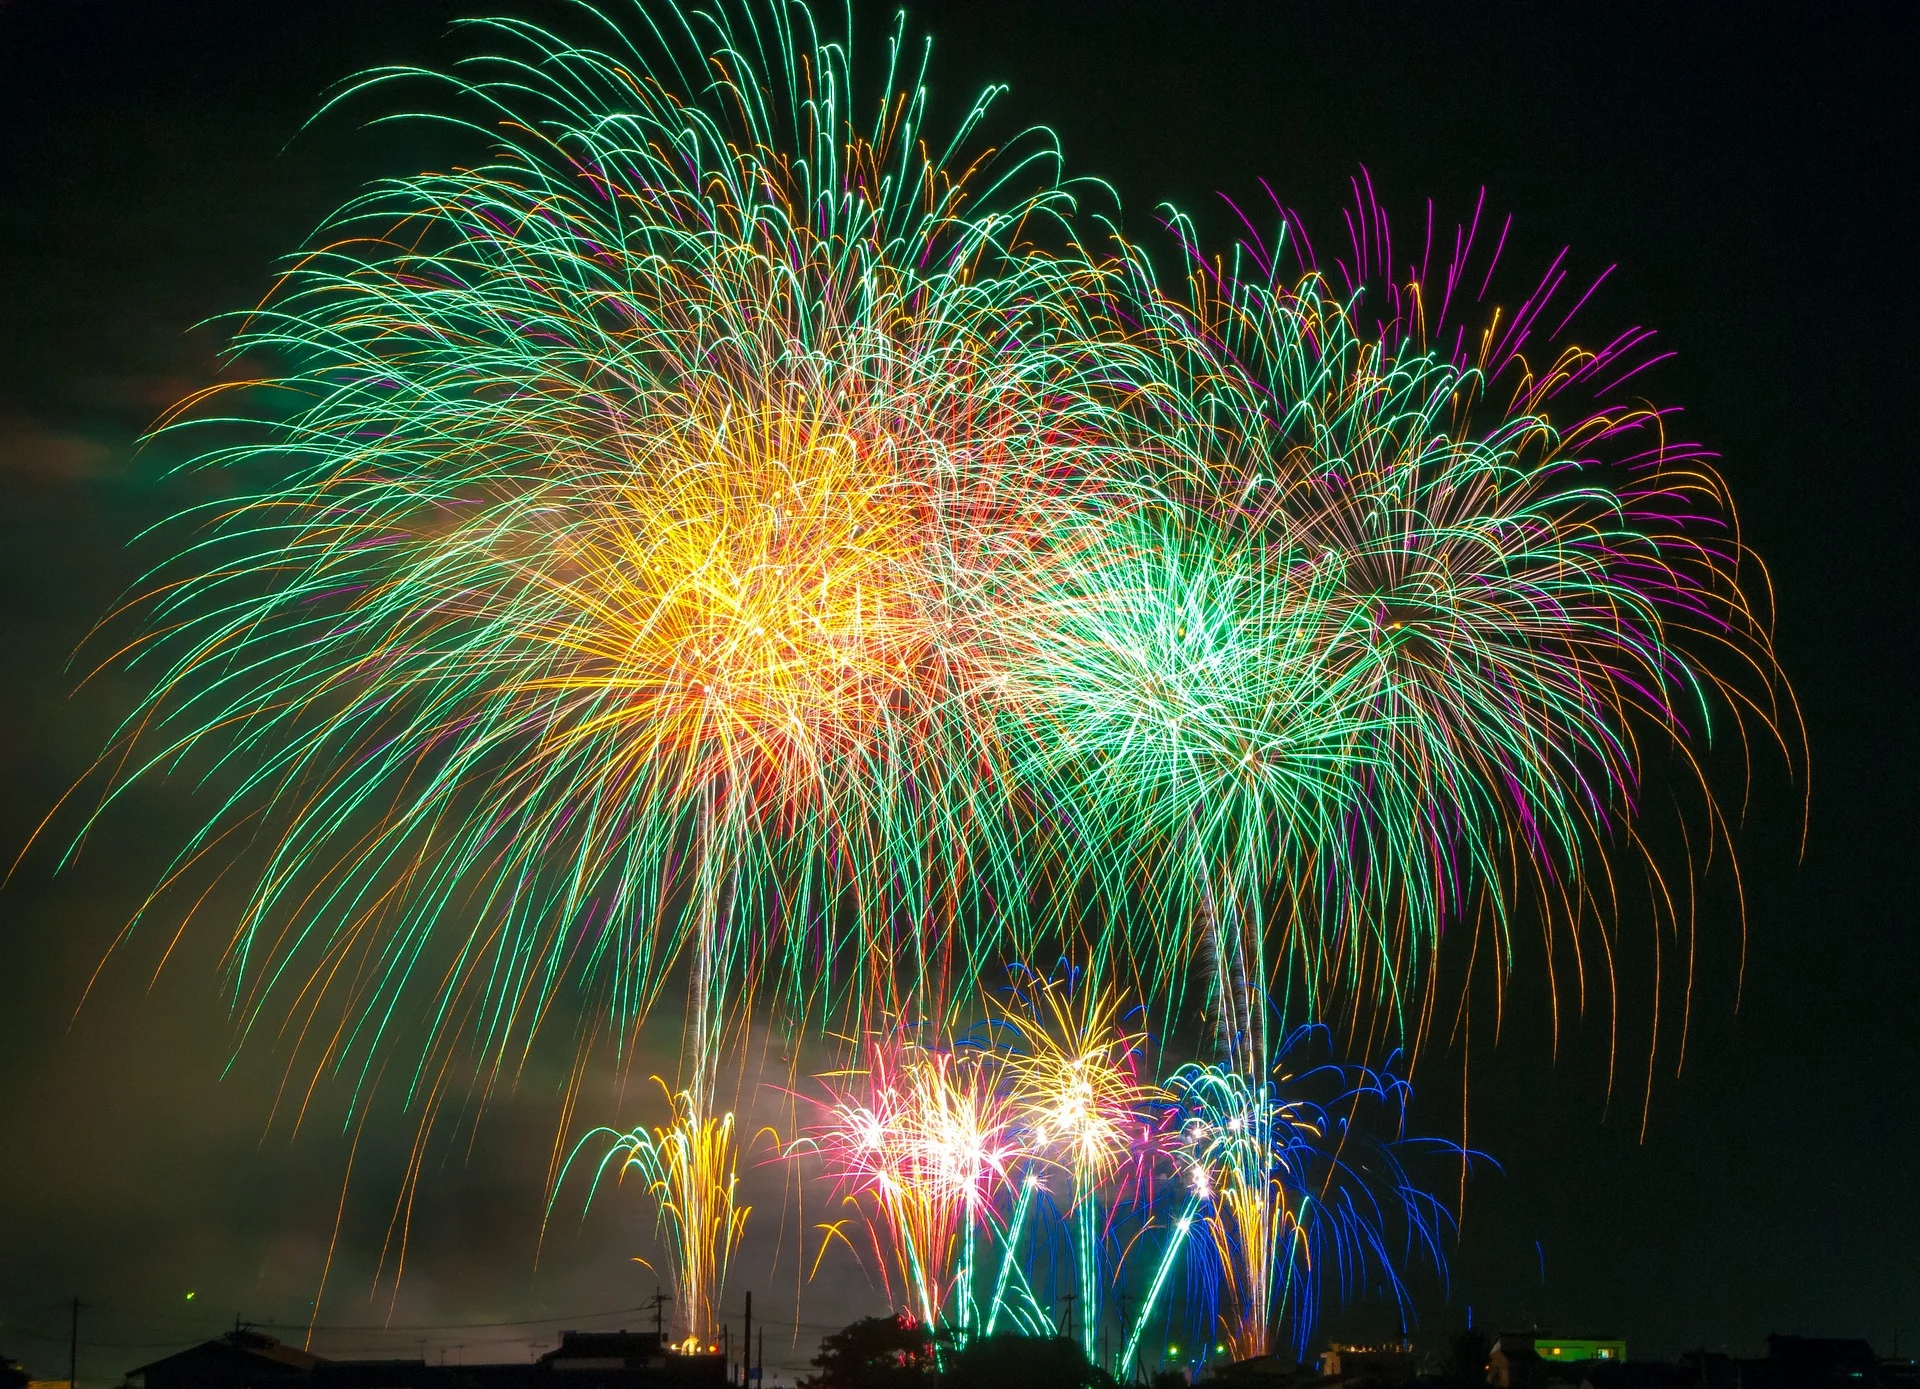 Here's how to plan for an amazing Canada Day fireworks display